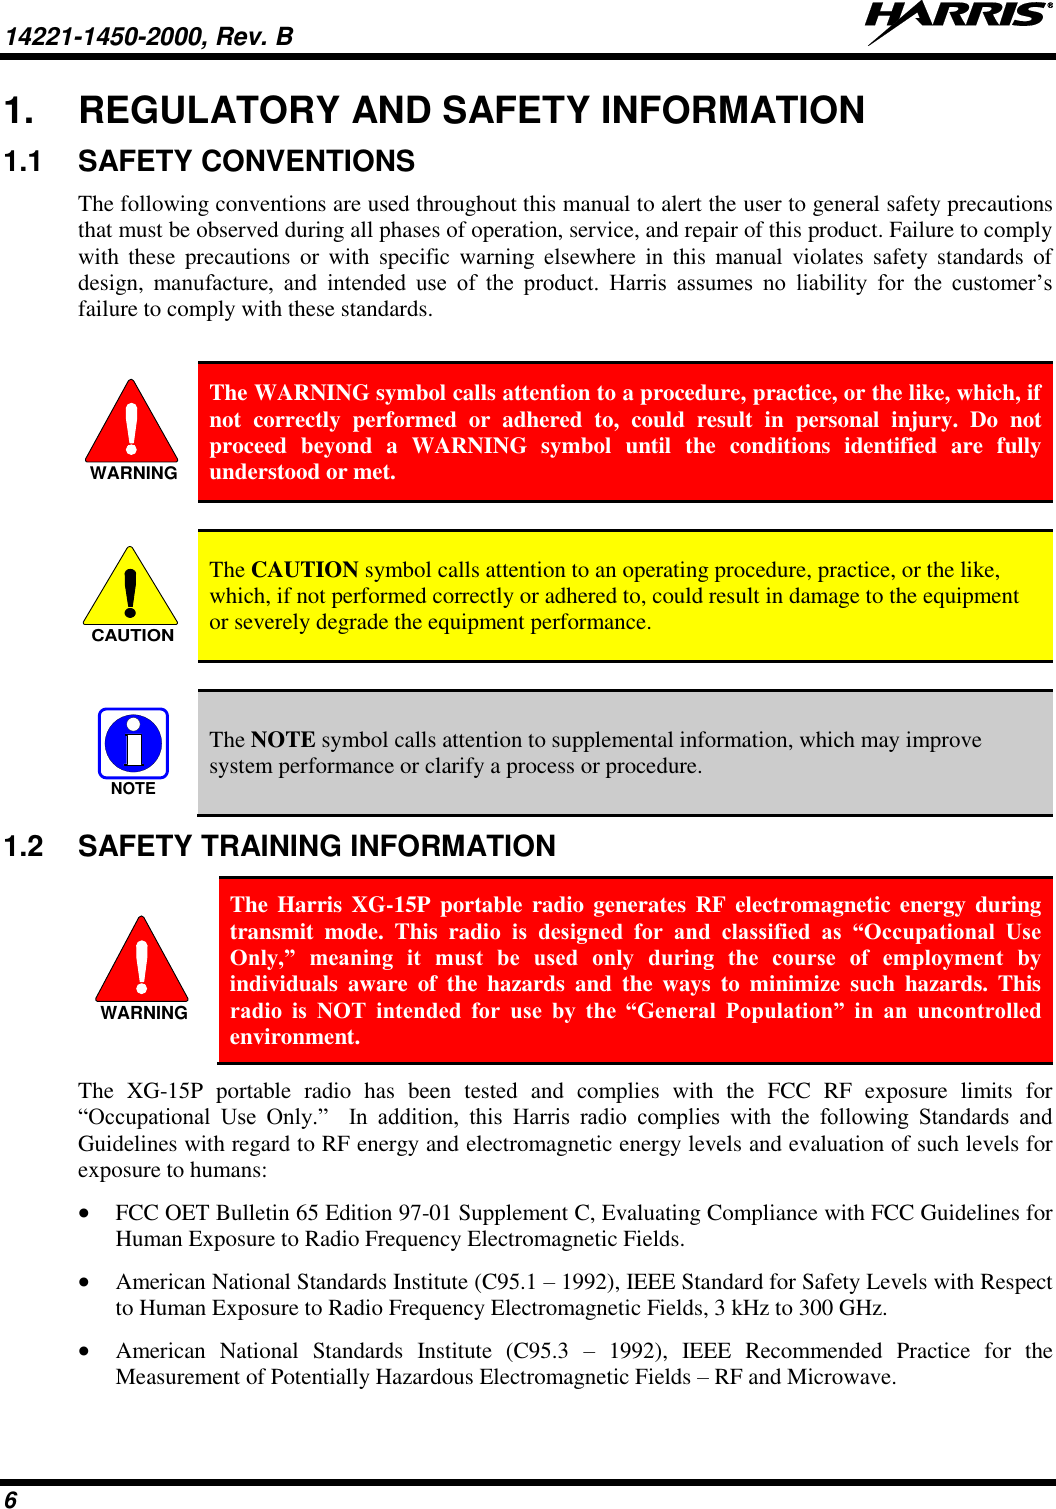 14221-1450-2000, Rev. B   6 1.  REGULATORY AND SAFETY INFORMATION 1.1  SAFETY CONVENTIONS The following conventions are used throughout this manual to alert the user to general safety precautions that must be observed during all phases of operation, service, and repair of this product. Failure to comply with  these  precautions  or  with  specific  warning  elsewhere  in  this  manual  violates safety  standards  of design,  manufacture,  and  intended  use  of  the  product.  Harris  assumes  no  liability  for  the  customer’s failure to comply with these standards.   The WARNING symbol calls attention to a procedure, practice, or the like, which, if not  correctly  performed  or  adhered  to,  could  result  in  personal  injury.  Do  not proceed  beyond  a  WARNING  symbol  until  the  conditions  identified  are  fully understood or met.    The CAUTION symbol calls attention to an operating procedure, practice, or the like, which, if not performed correctly or adhered to, could result in damage to the equipment or severely degrade the equipment performance.    The NOTE symbol calls attention to supplemental information, which may improve system performance or clarify a process or procedure. 1.2  SAFETY TRAINING INFORMATION  The Harris  XG-15P portable radio generates RF  electromagnetic energy during transmit  mode.  This  radio  is  designed  for  and  classified  as  “Occupational  Use Only,”  meaning  it  must  be  used  only  during  the  course  of  employment  by individuals  aware  of  the  hazards  and  the  ways  to  minimize  such  hazards.  This radio  is  NOT  intended  for  use  by  the  “General  Population”  in  an  uncontrolled environment. The  XG-15P  portable  radio  has  been  tested  and  complies  with  the  FCC  RF  exposure  limits  for “Occupational  Use  Only.”    In  addition,  this  Harris  radio  complies  with  the  following  Standards  and Guidelines with regard to RF energy and electromagnetic energy levels and evaluation of such levels for exposure to humans:  FCC OET Bulletin 65 Edition 97-01 Supplement C, Evaluating Compliance with FCC Guidelines for Human Exposure to Radio Frequency Electromagnetic Fields.  American National Standards Institute (C95.1 – 1992), IEEE Standard for Safety Levels with Respect to Human Exposure to Radio Frequency Electromagnetic Fields, 3 kHz to 300 GHz.  American  National  Standards  Institute  (C95.3  –  1992),  IEEE  Recommended  Practice  for  the Measurement of Potentially Hazardous Electromagnetic Fields – RF and Microwave. WARNINGCAUTIONNOTEWARNING